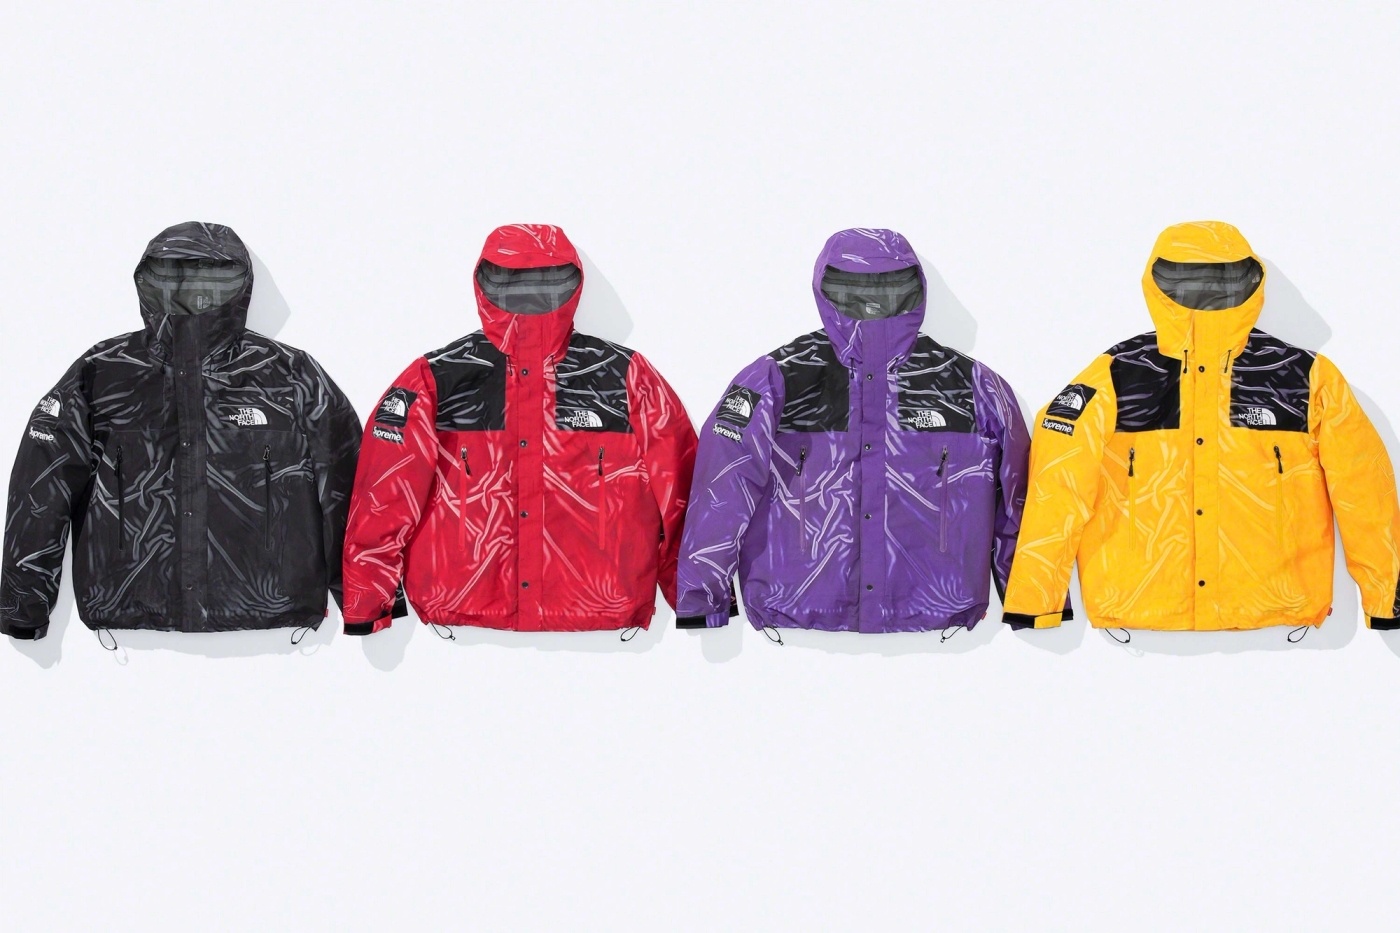 How to Get the New Supreme x The North Face Collaboration